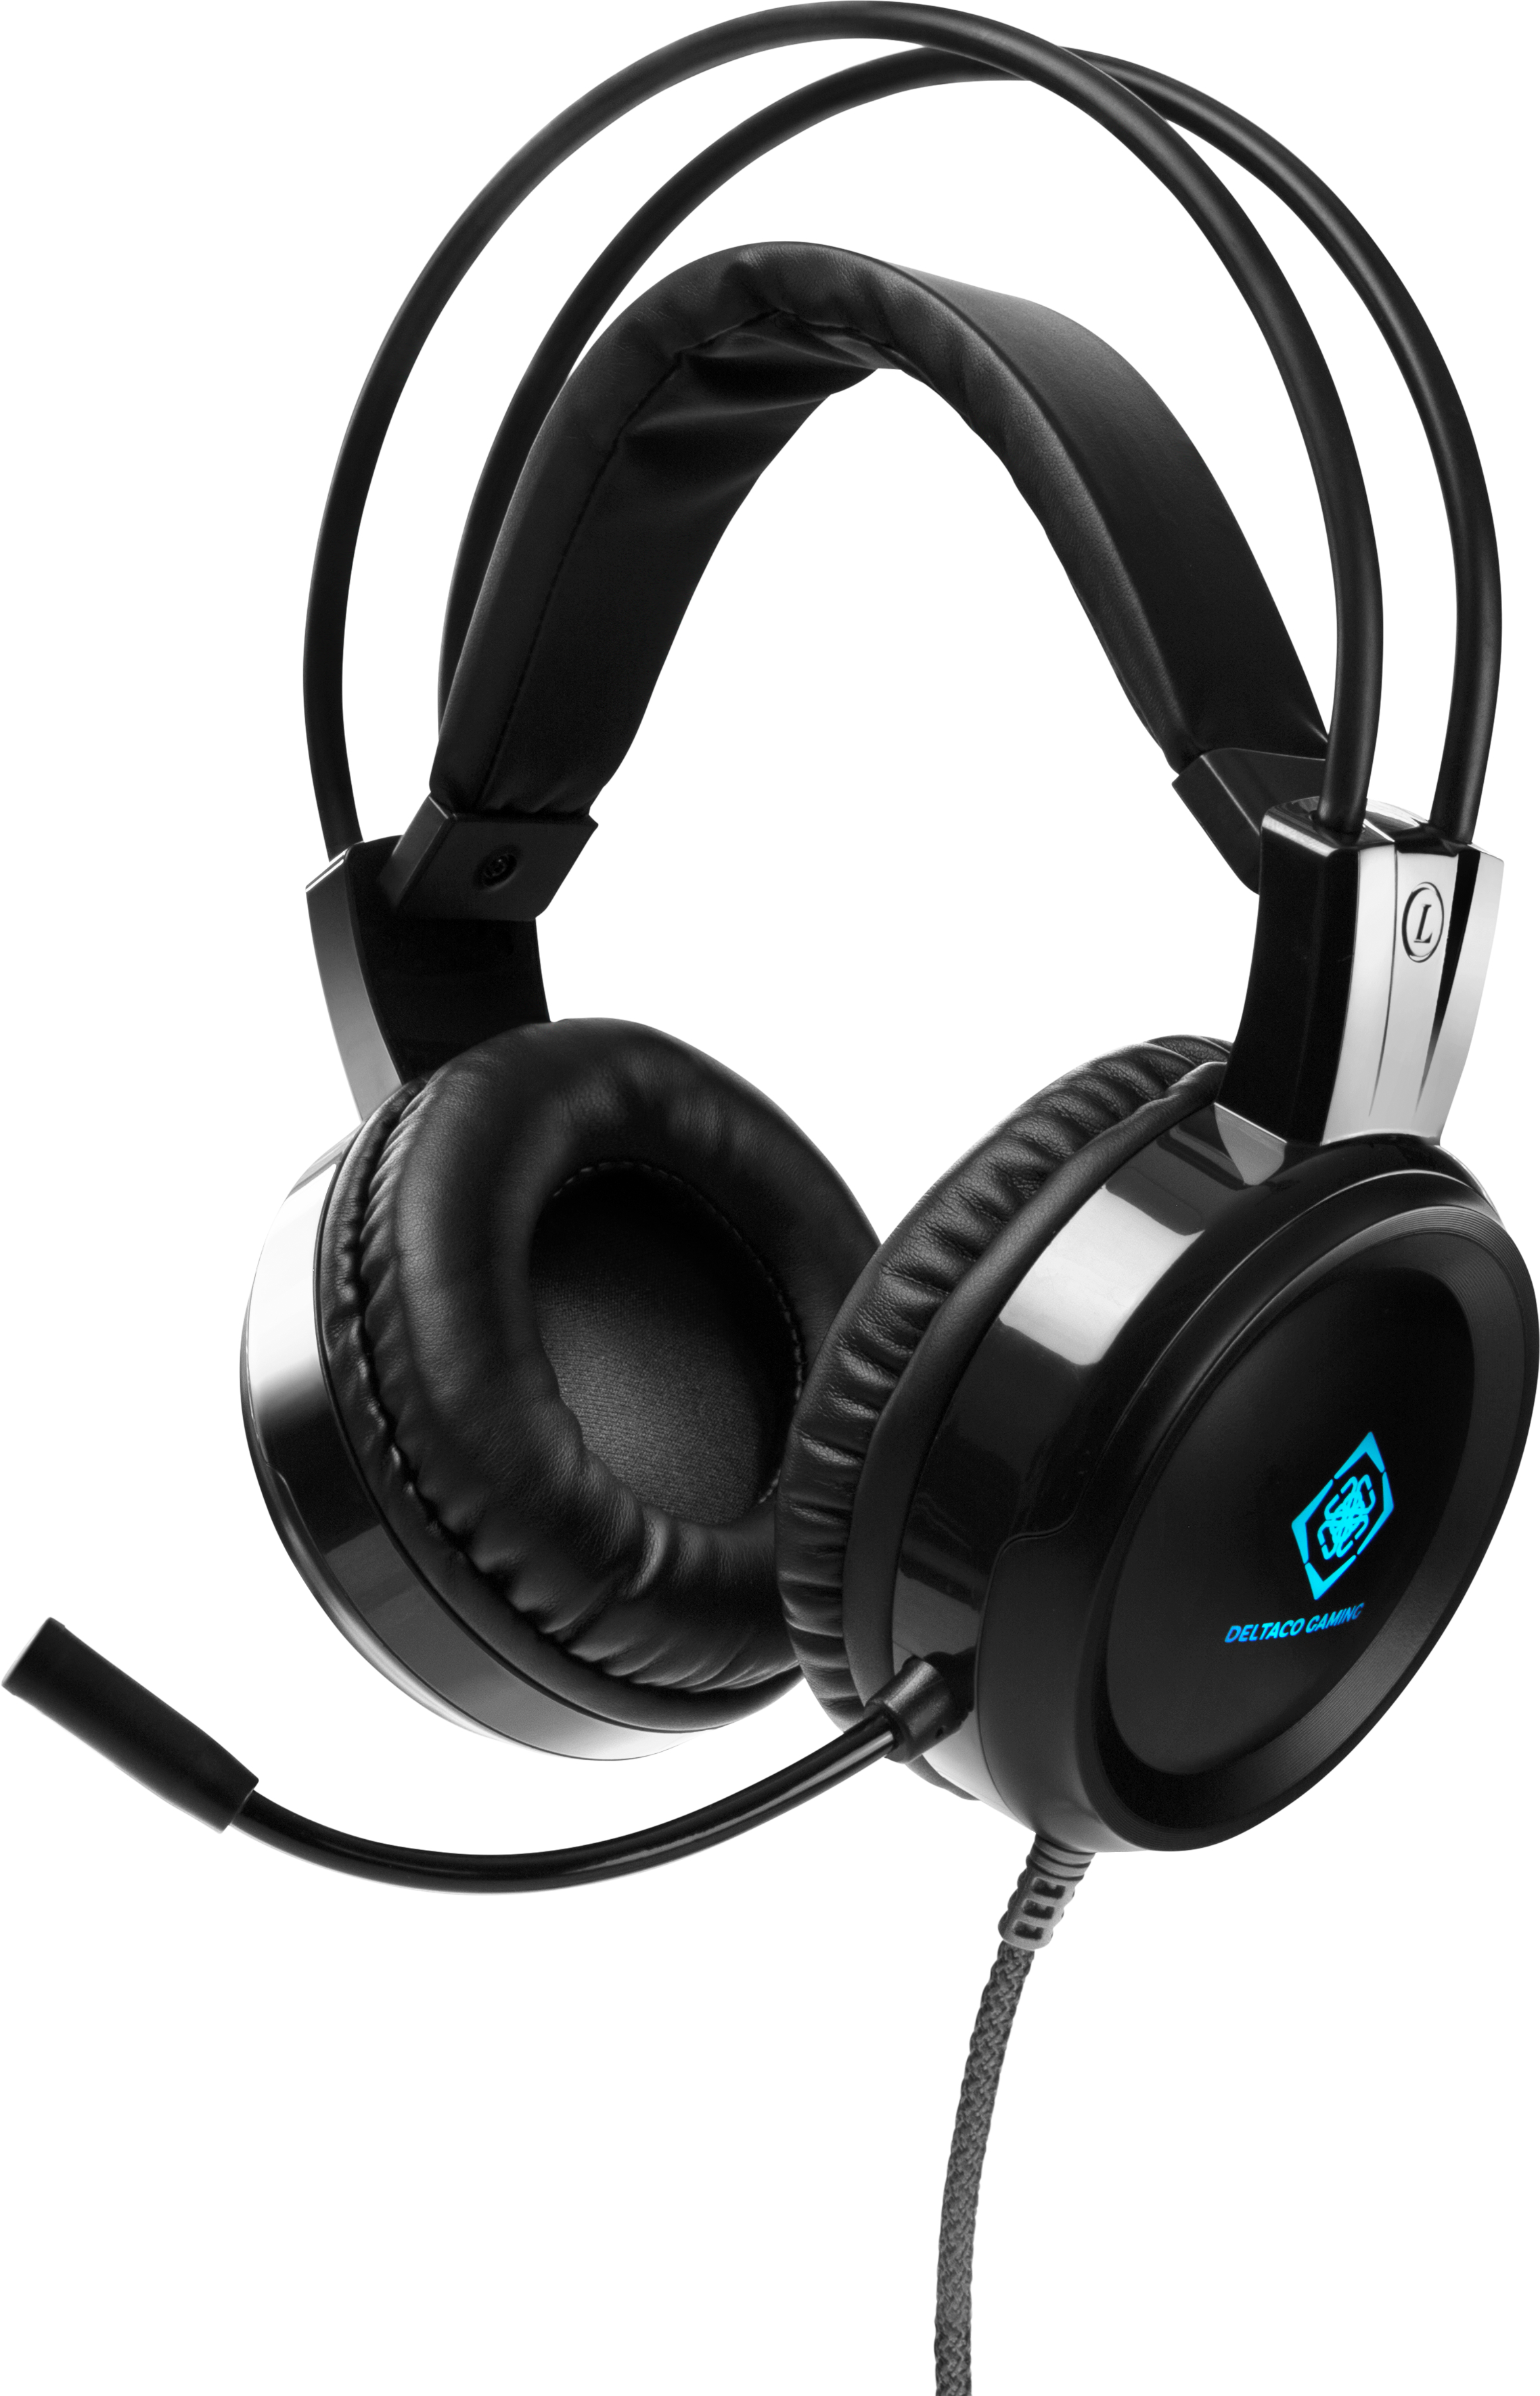 DELTACO Stereo Gaming Headset DH110 GAM-105 with LED